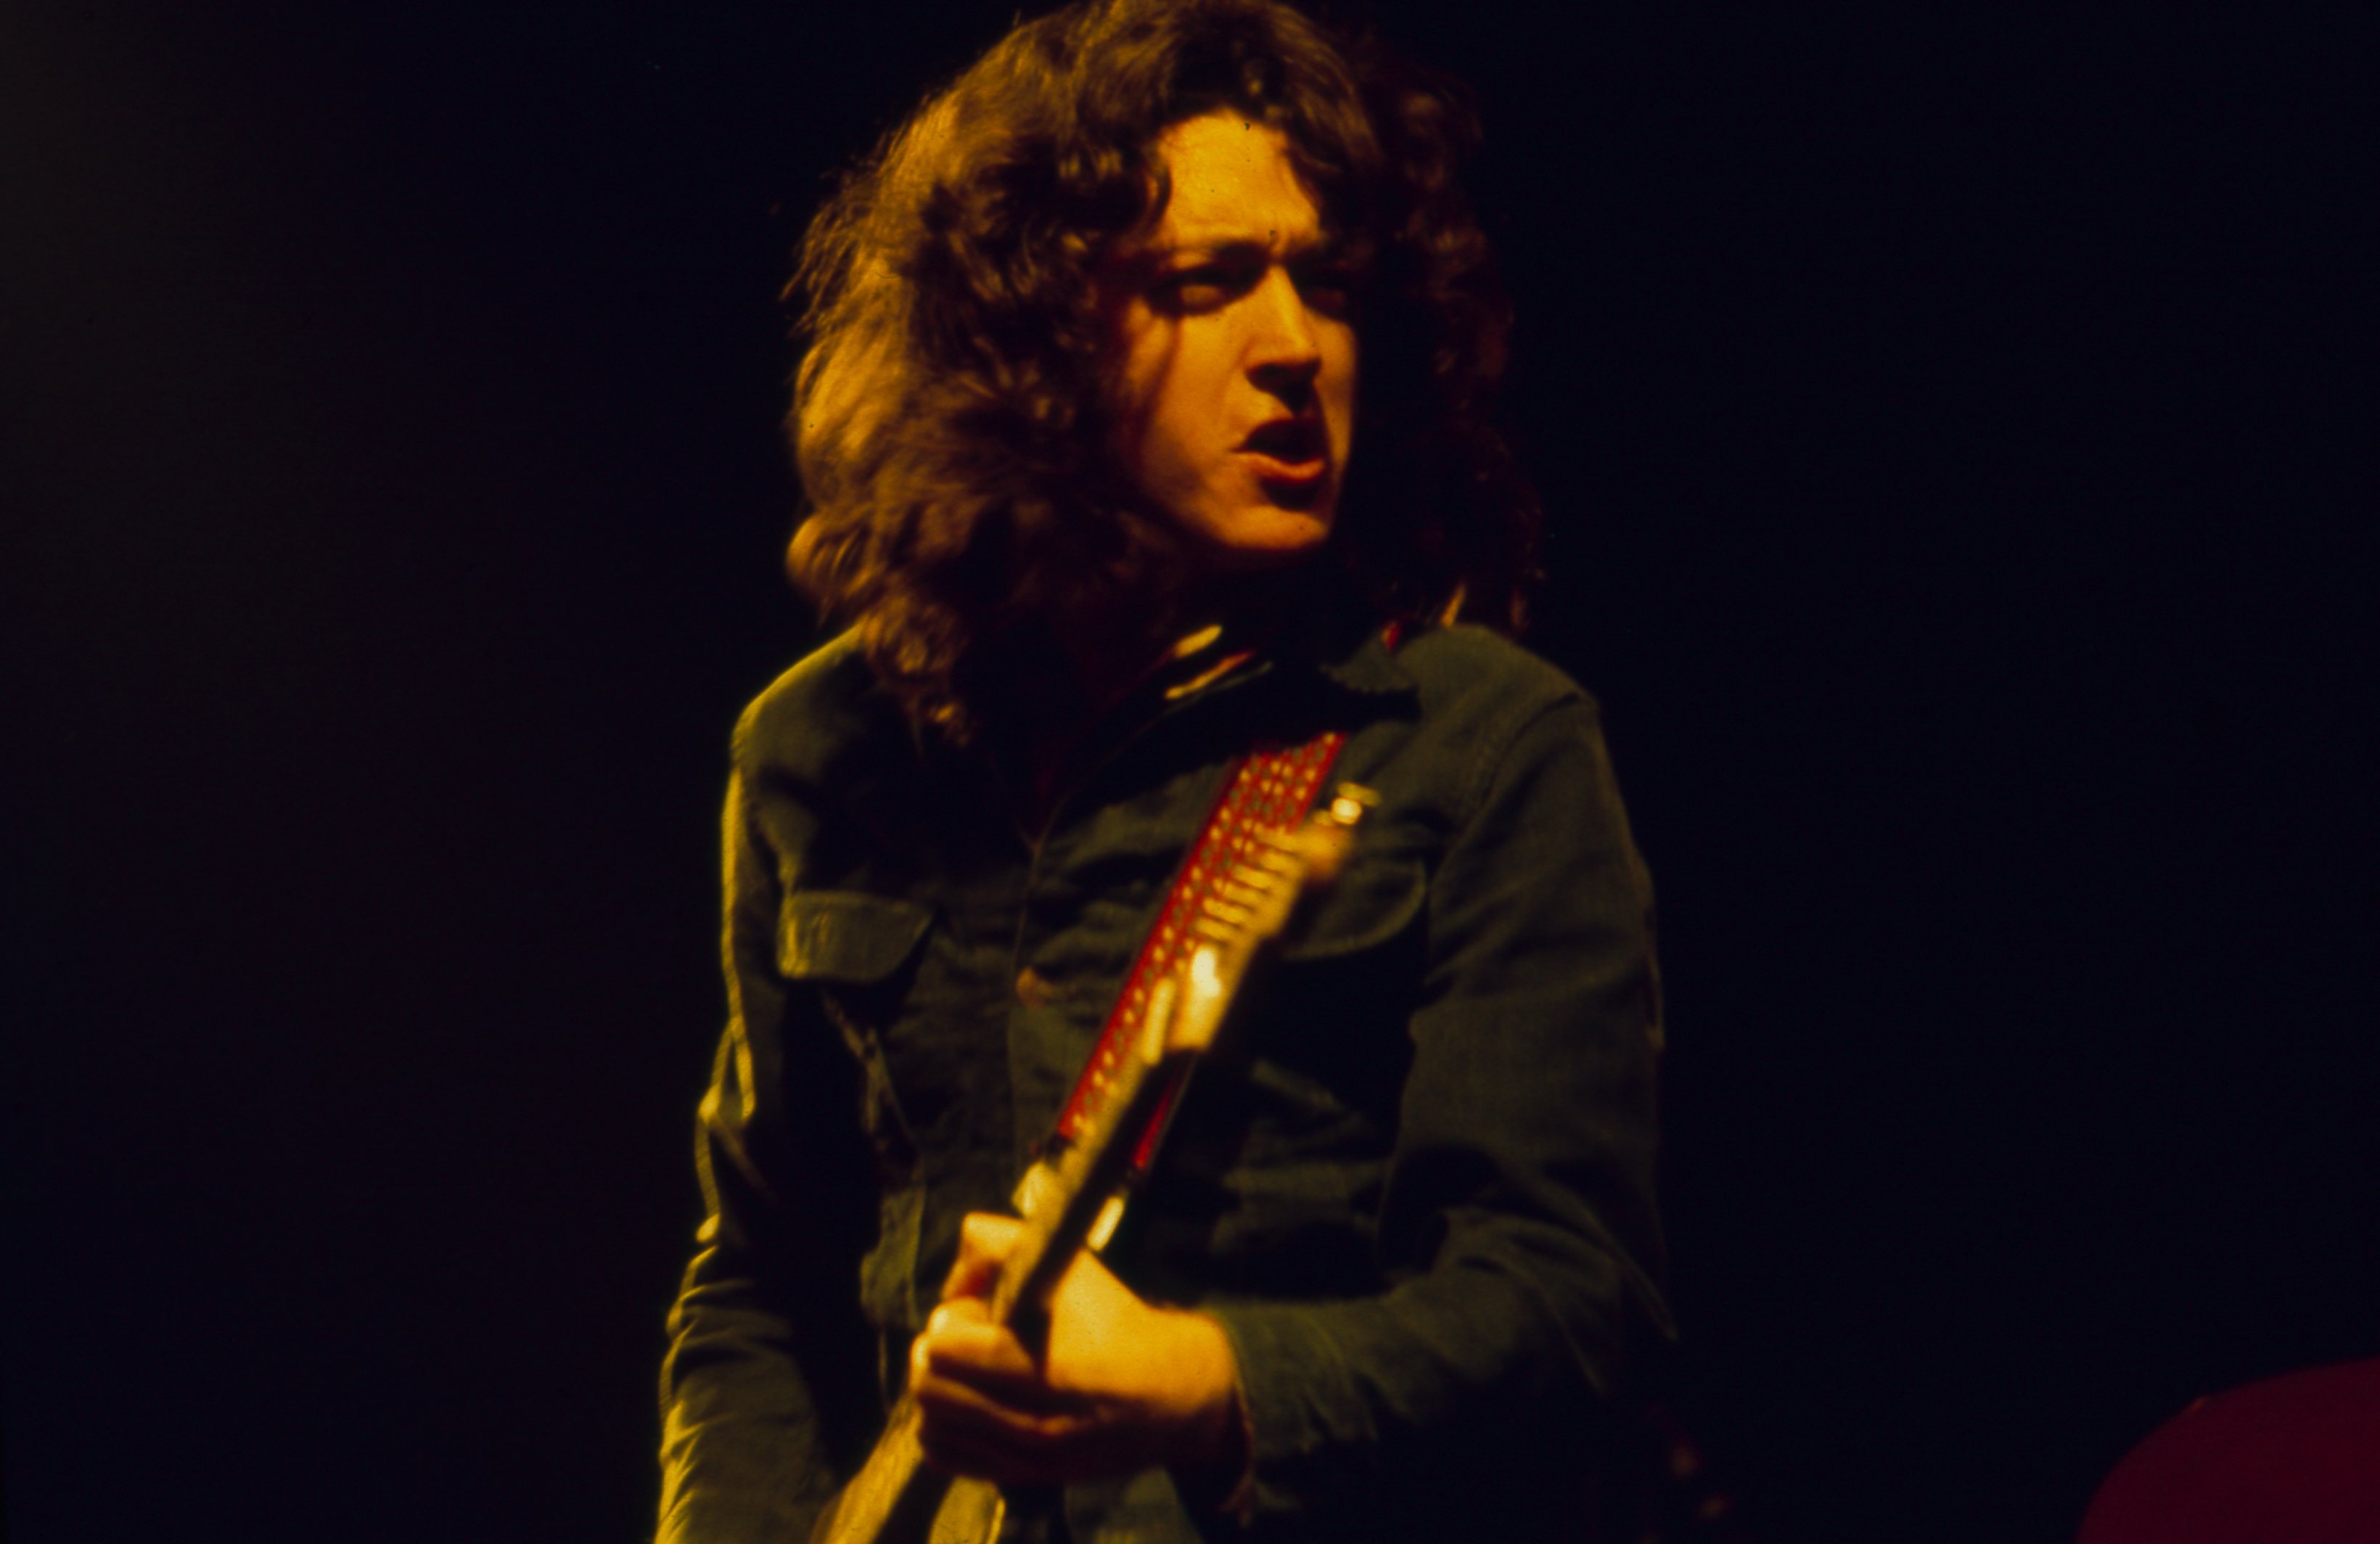 A Tribute to Rory Gallagher